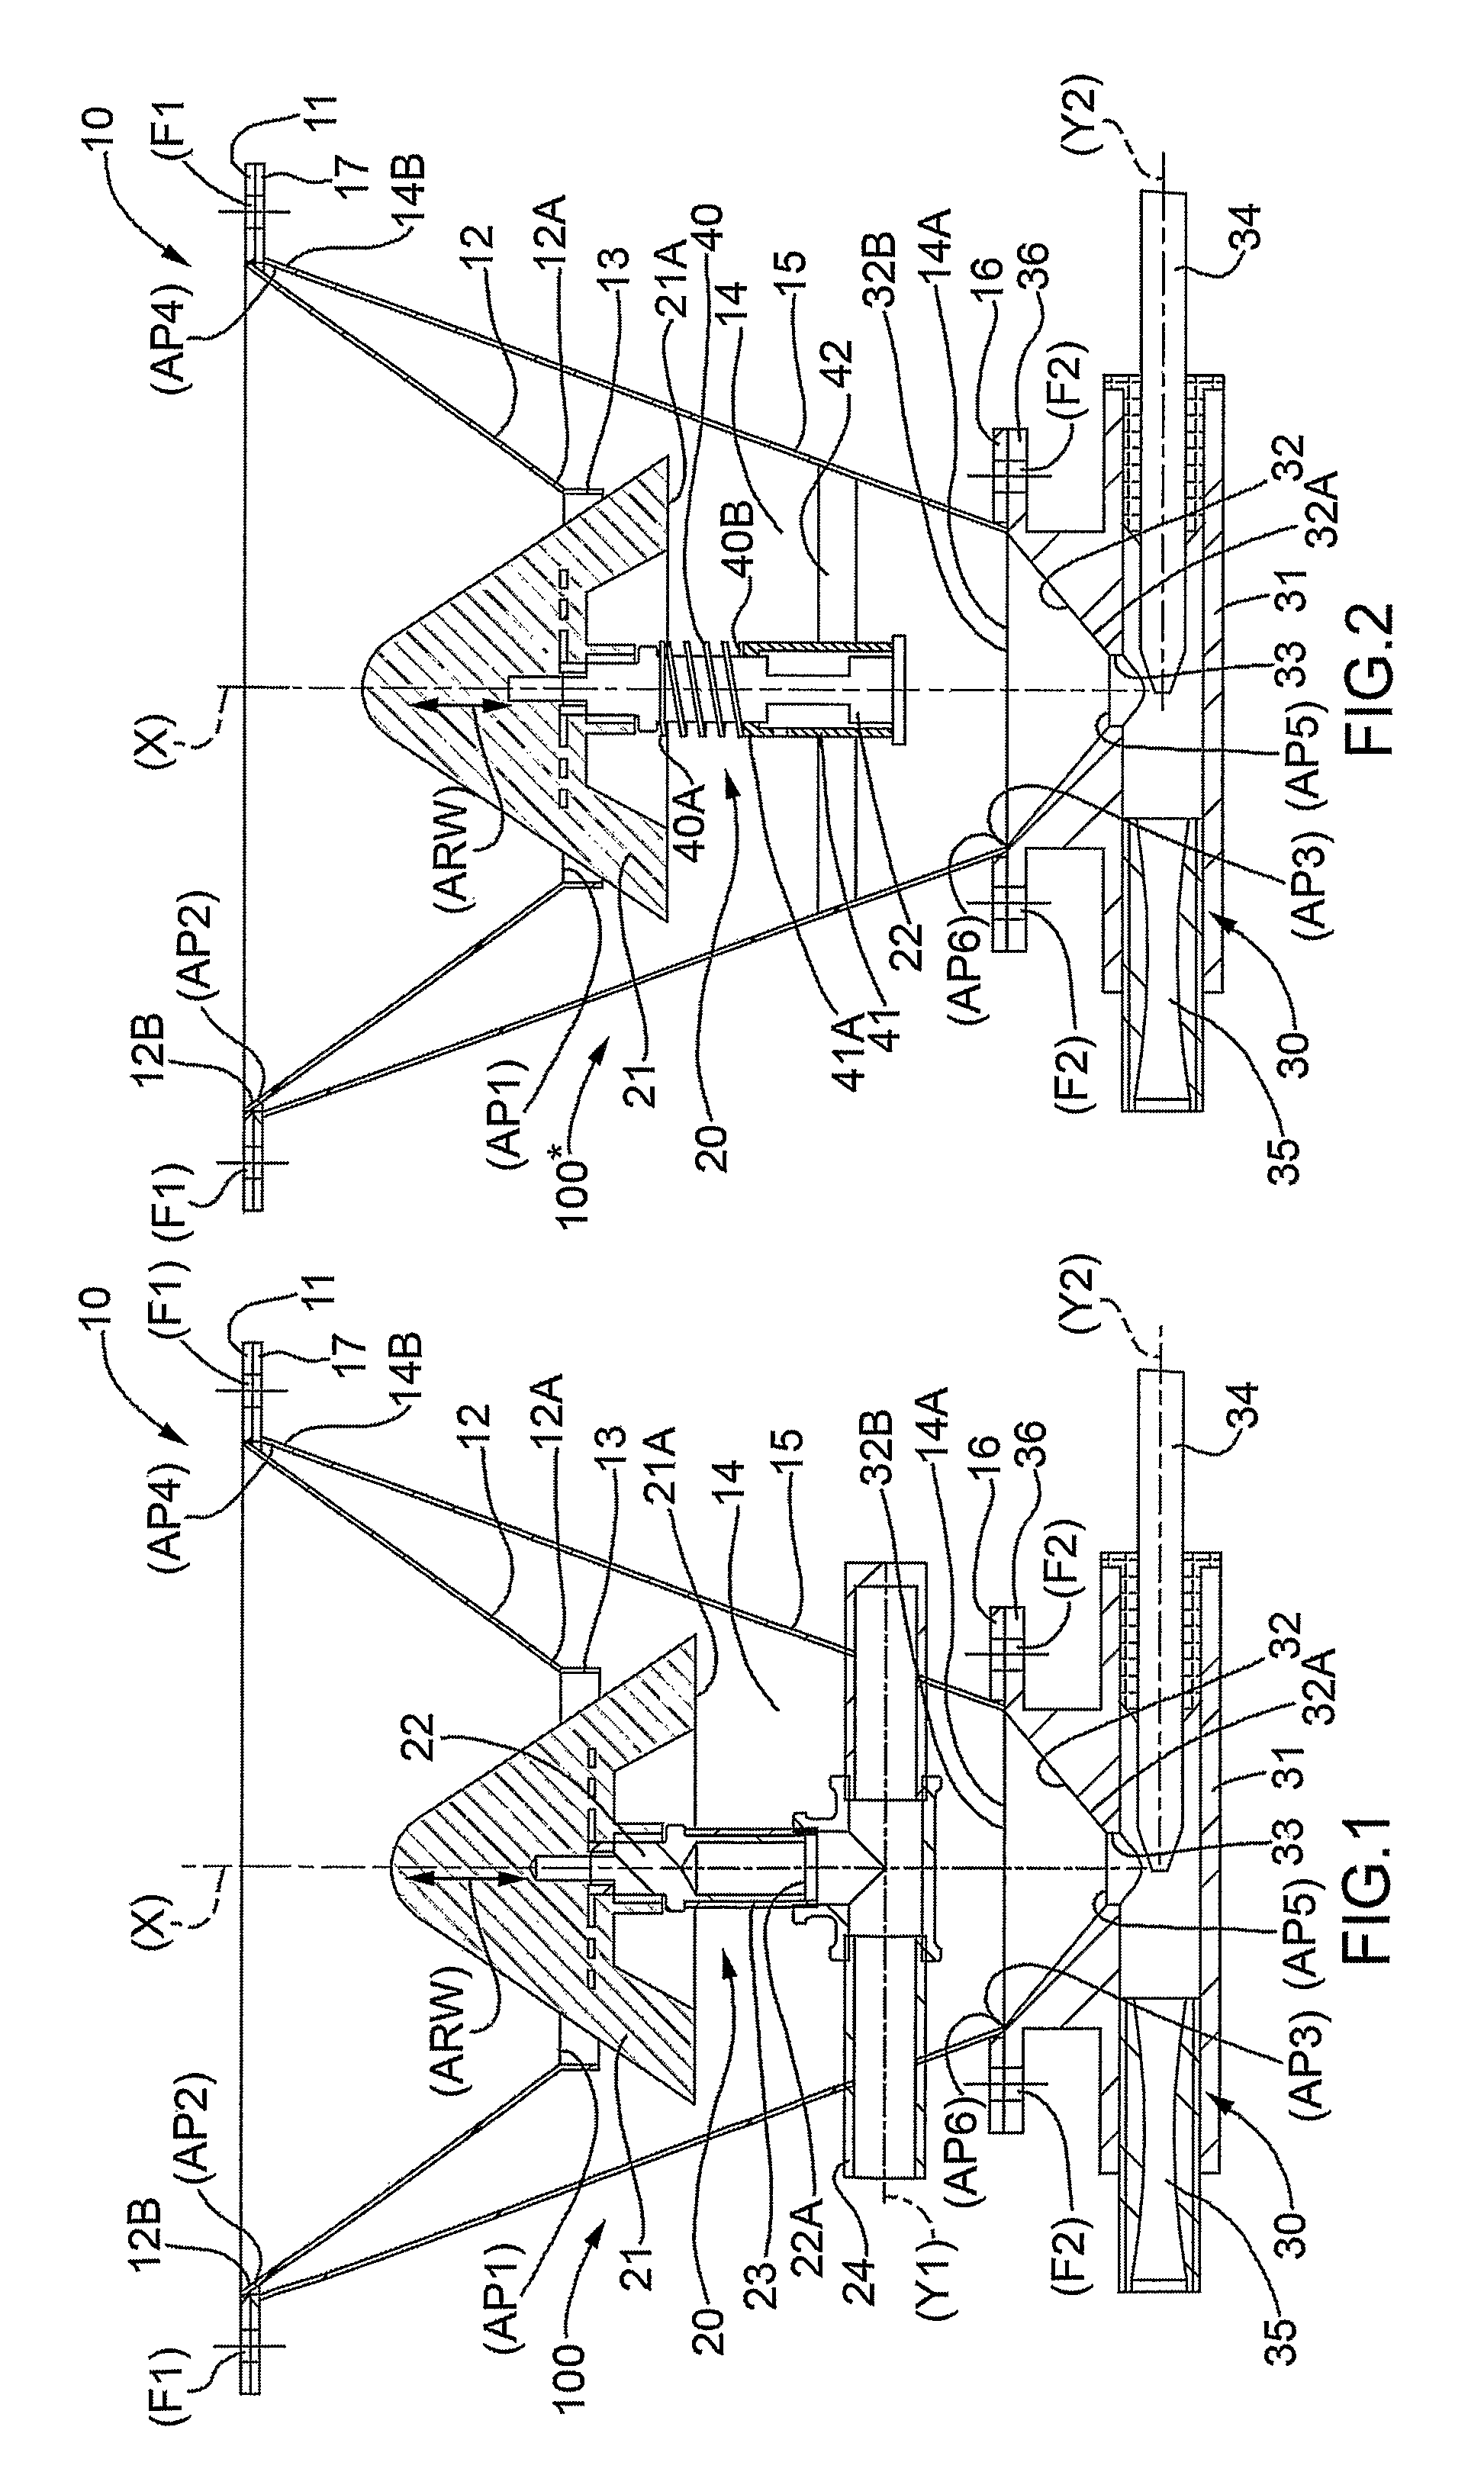 Apparatus and related method for the recovery and the pneumatic transportation of dust coming from a filtration system